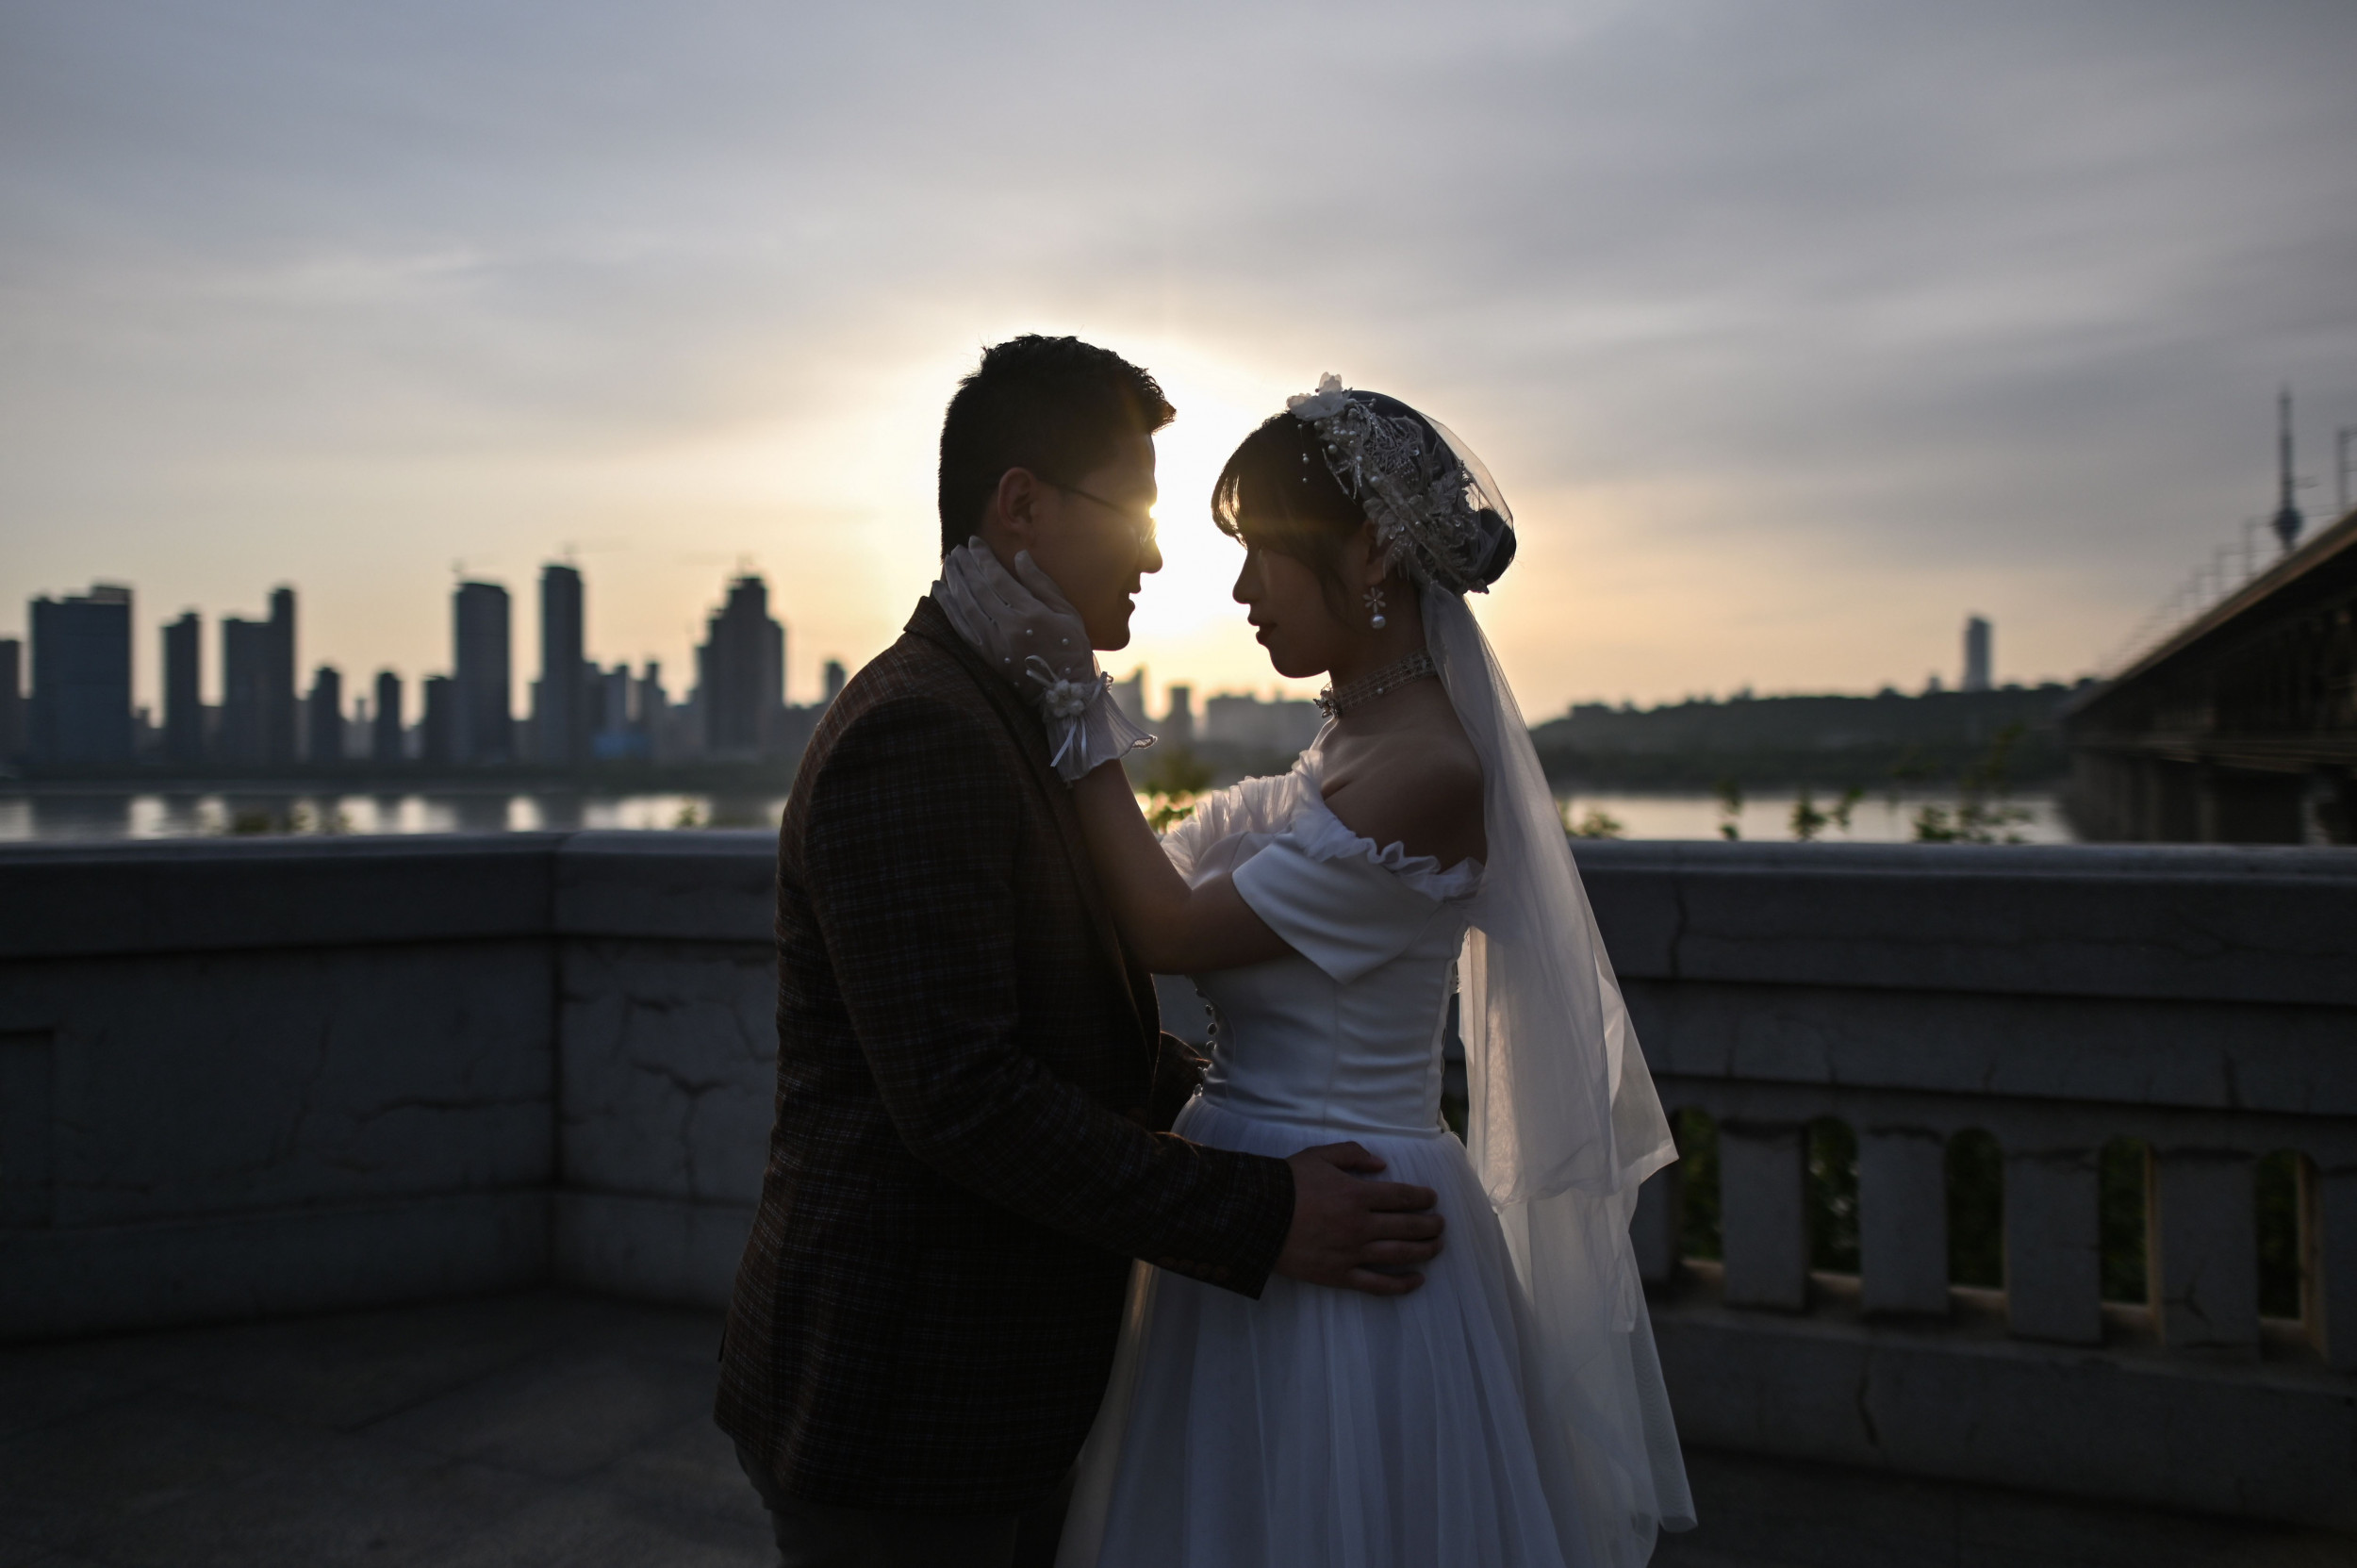 Sunbeam Wedding Couple Poses By Window in Elegant Venue The Bride and Groom  Share a Moment in the, Stock Footage